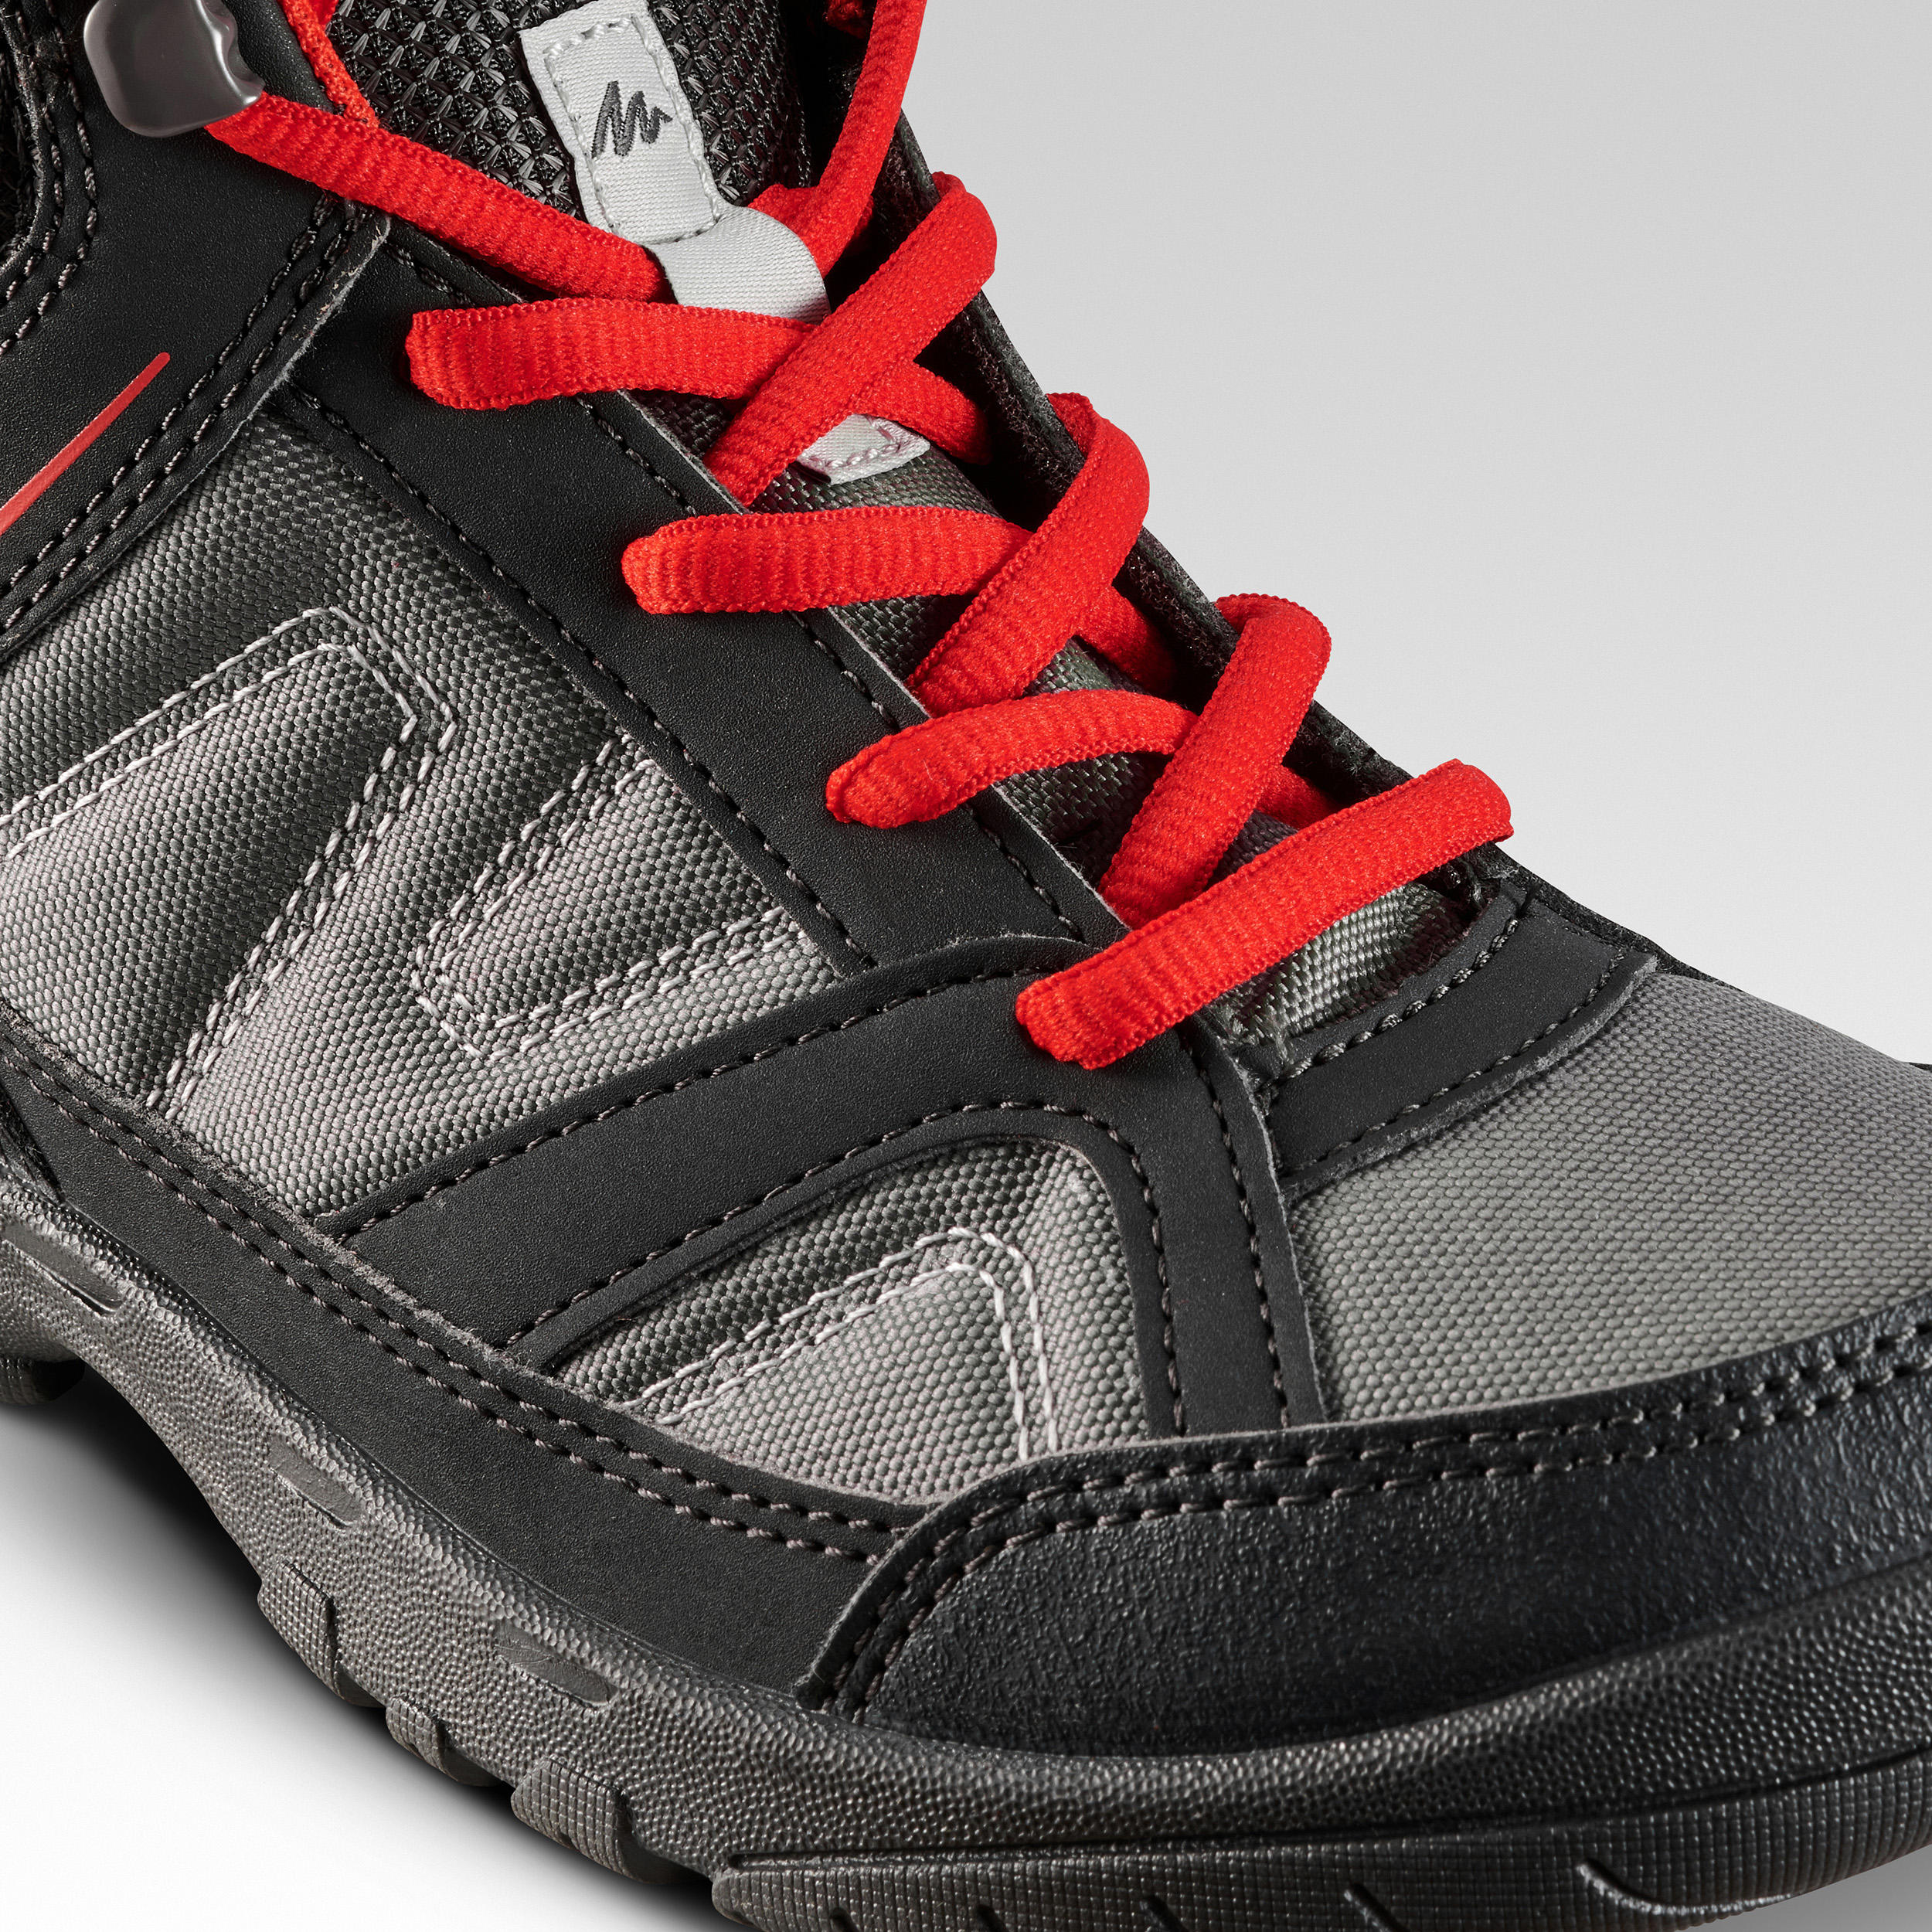 Kids Hiking Boots 35 TO 38 Mid JR MH100 - Black/Red 6/6